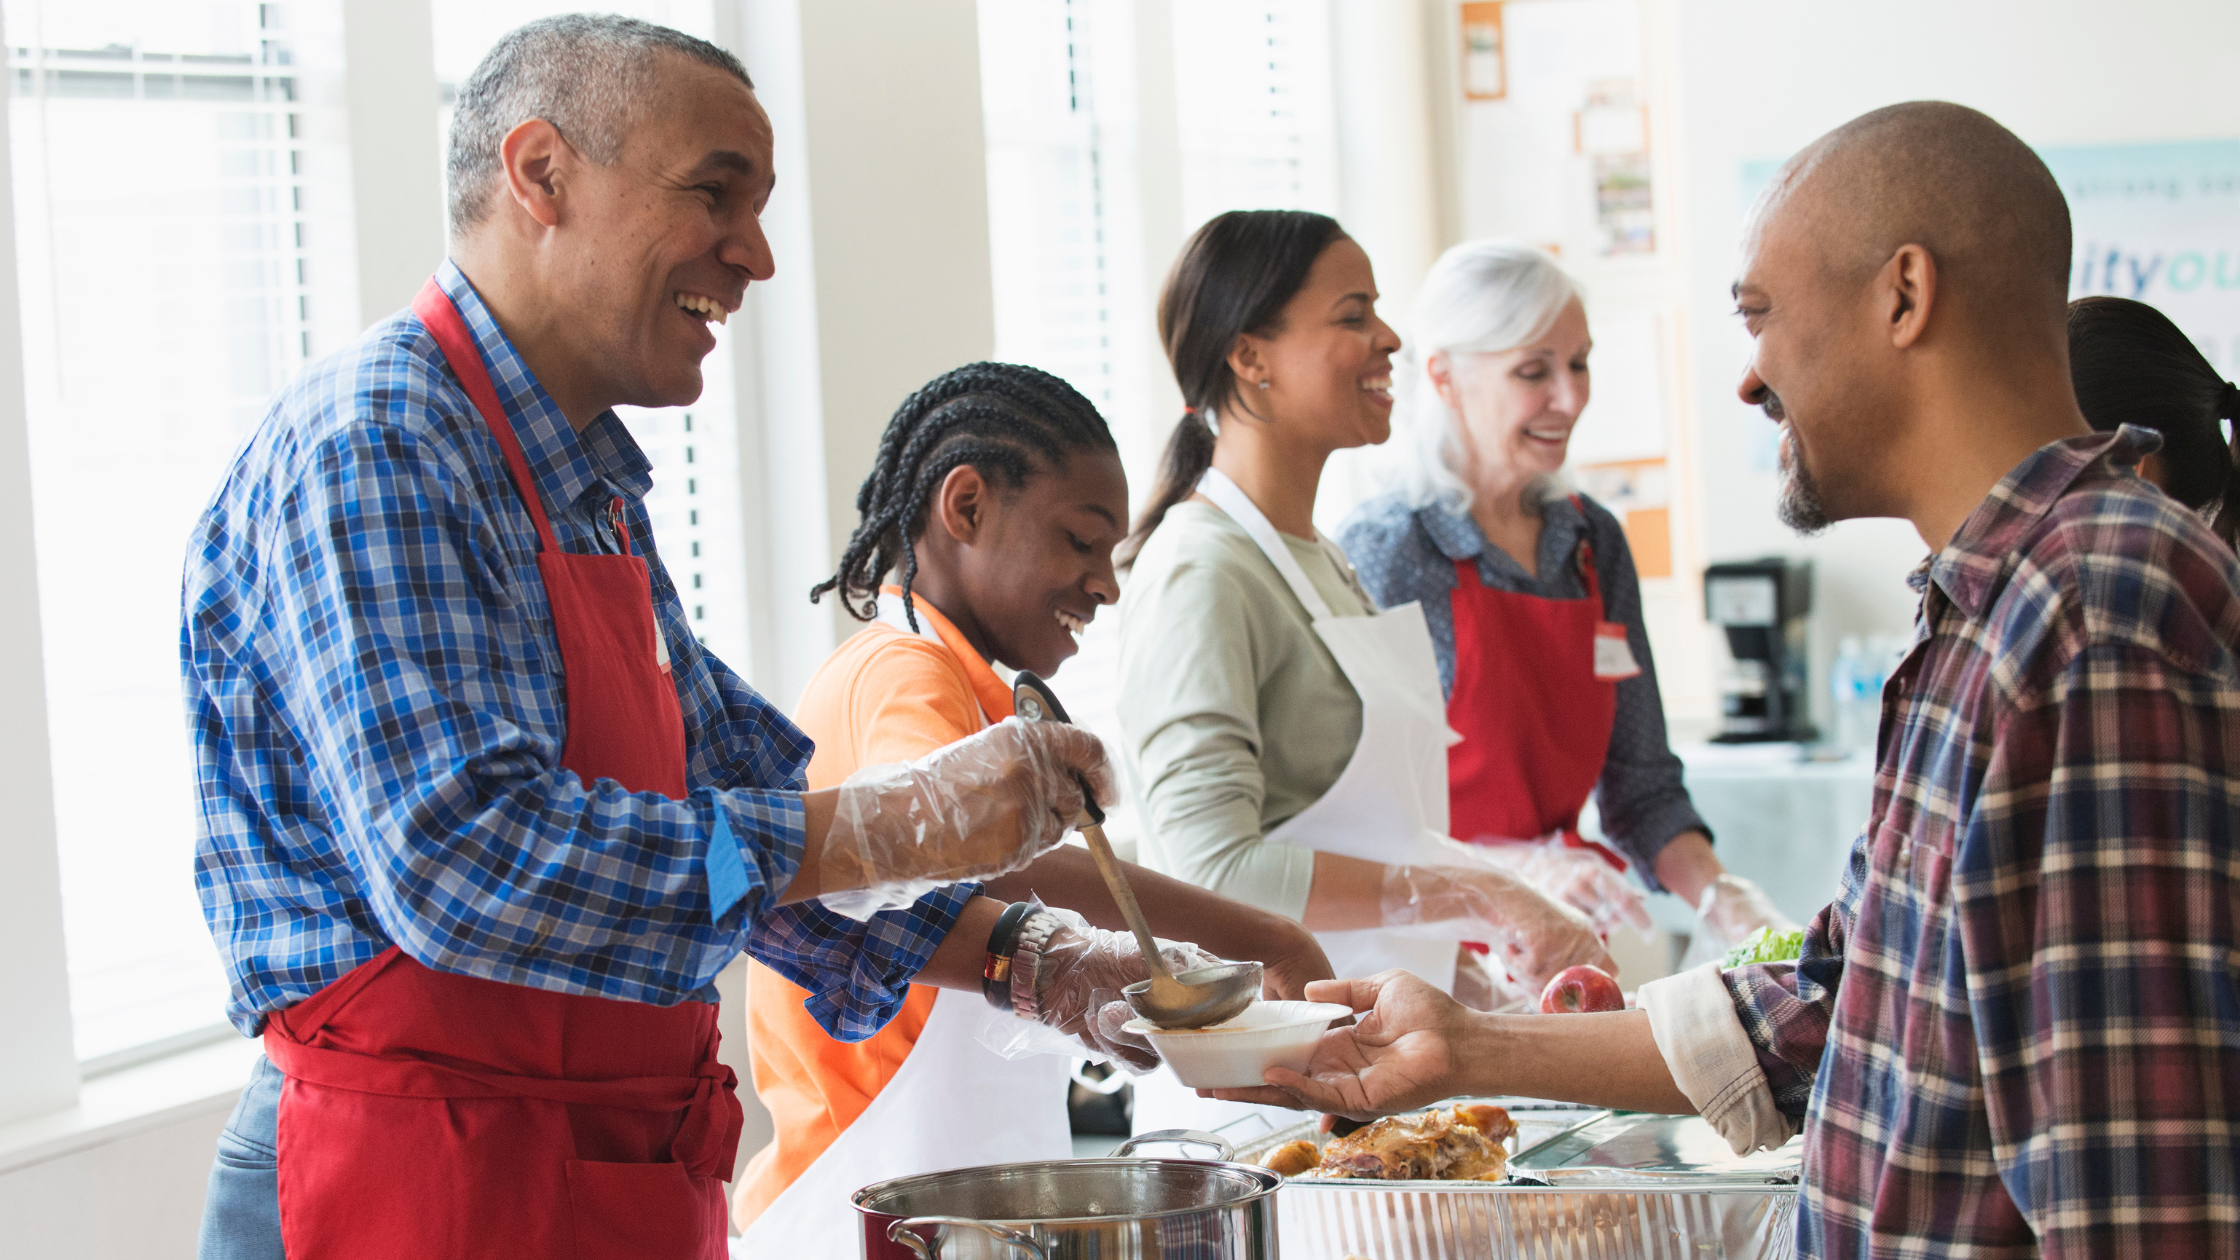 How Nonprofits Can Build Community and Attract New Donors